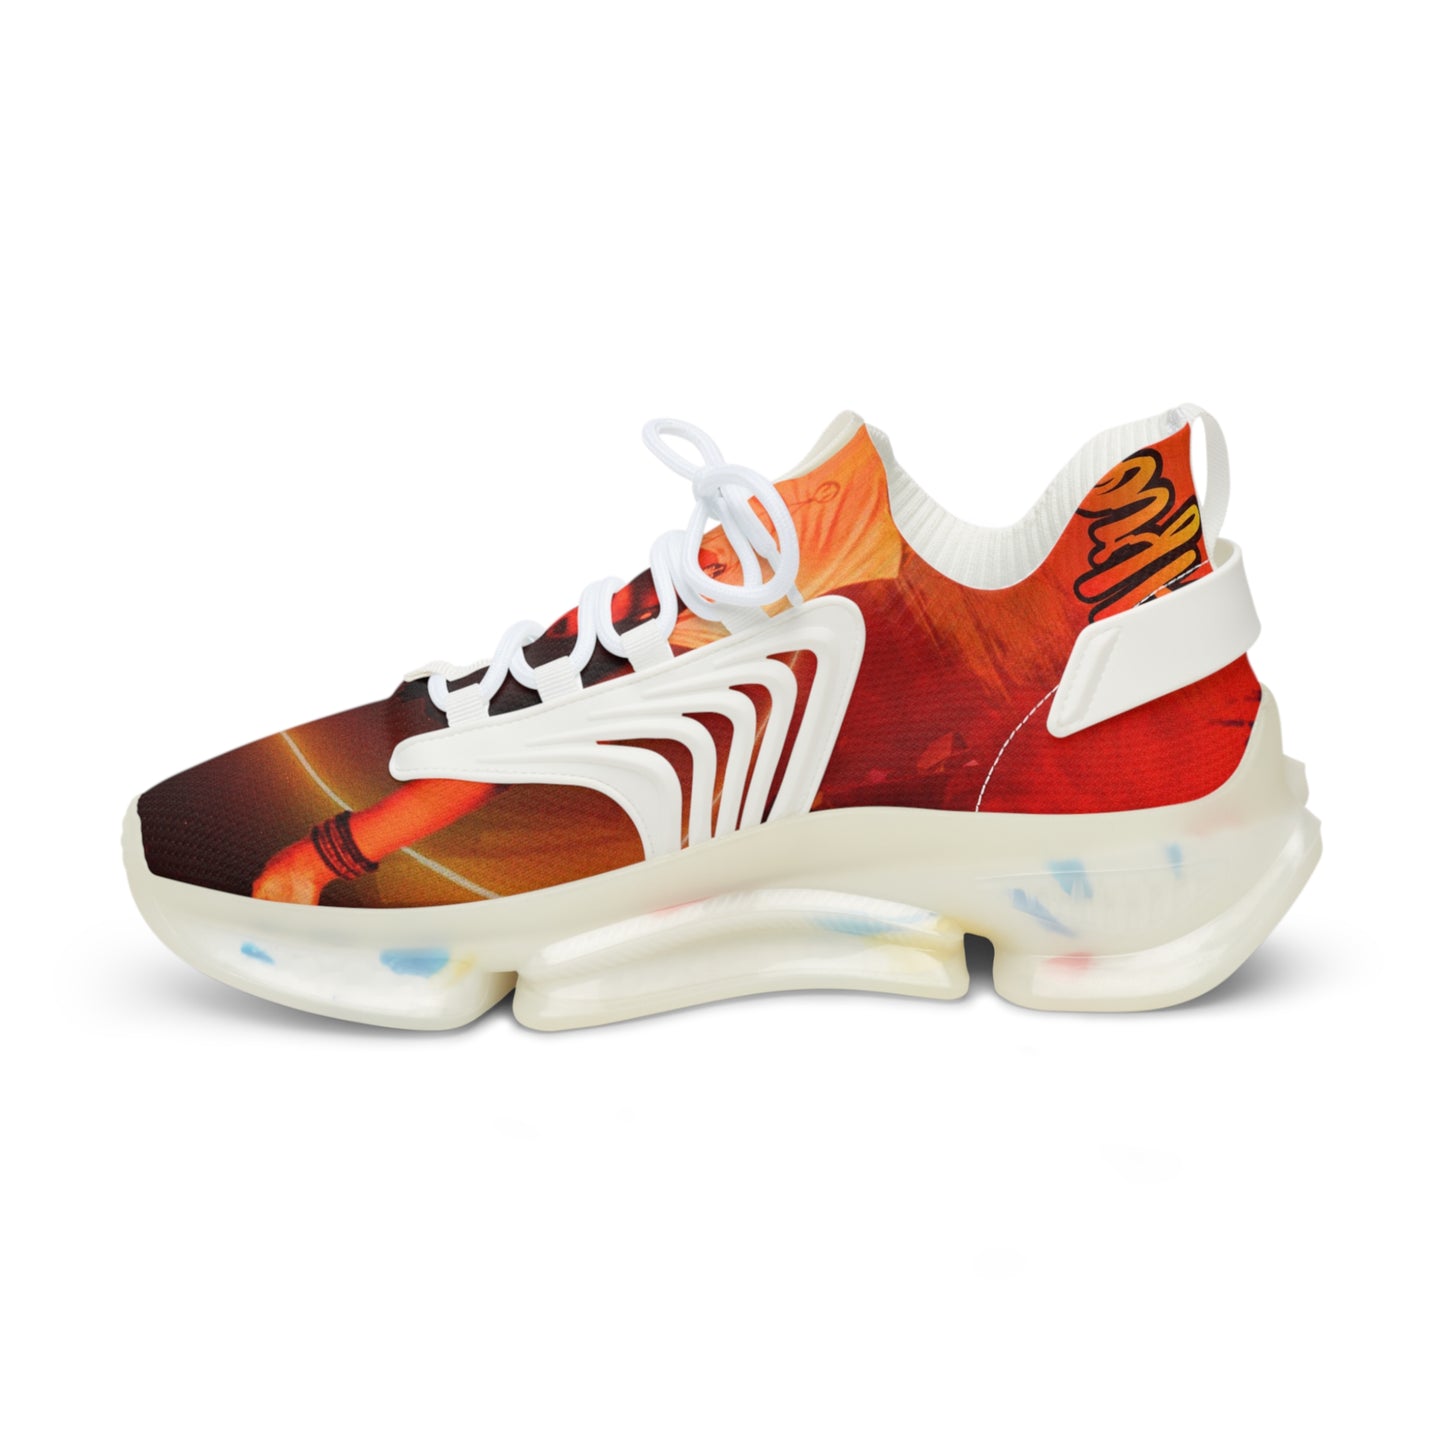 Fire and Desire Mesh Sneakers